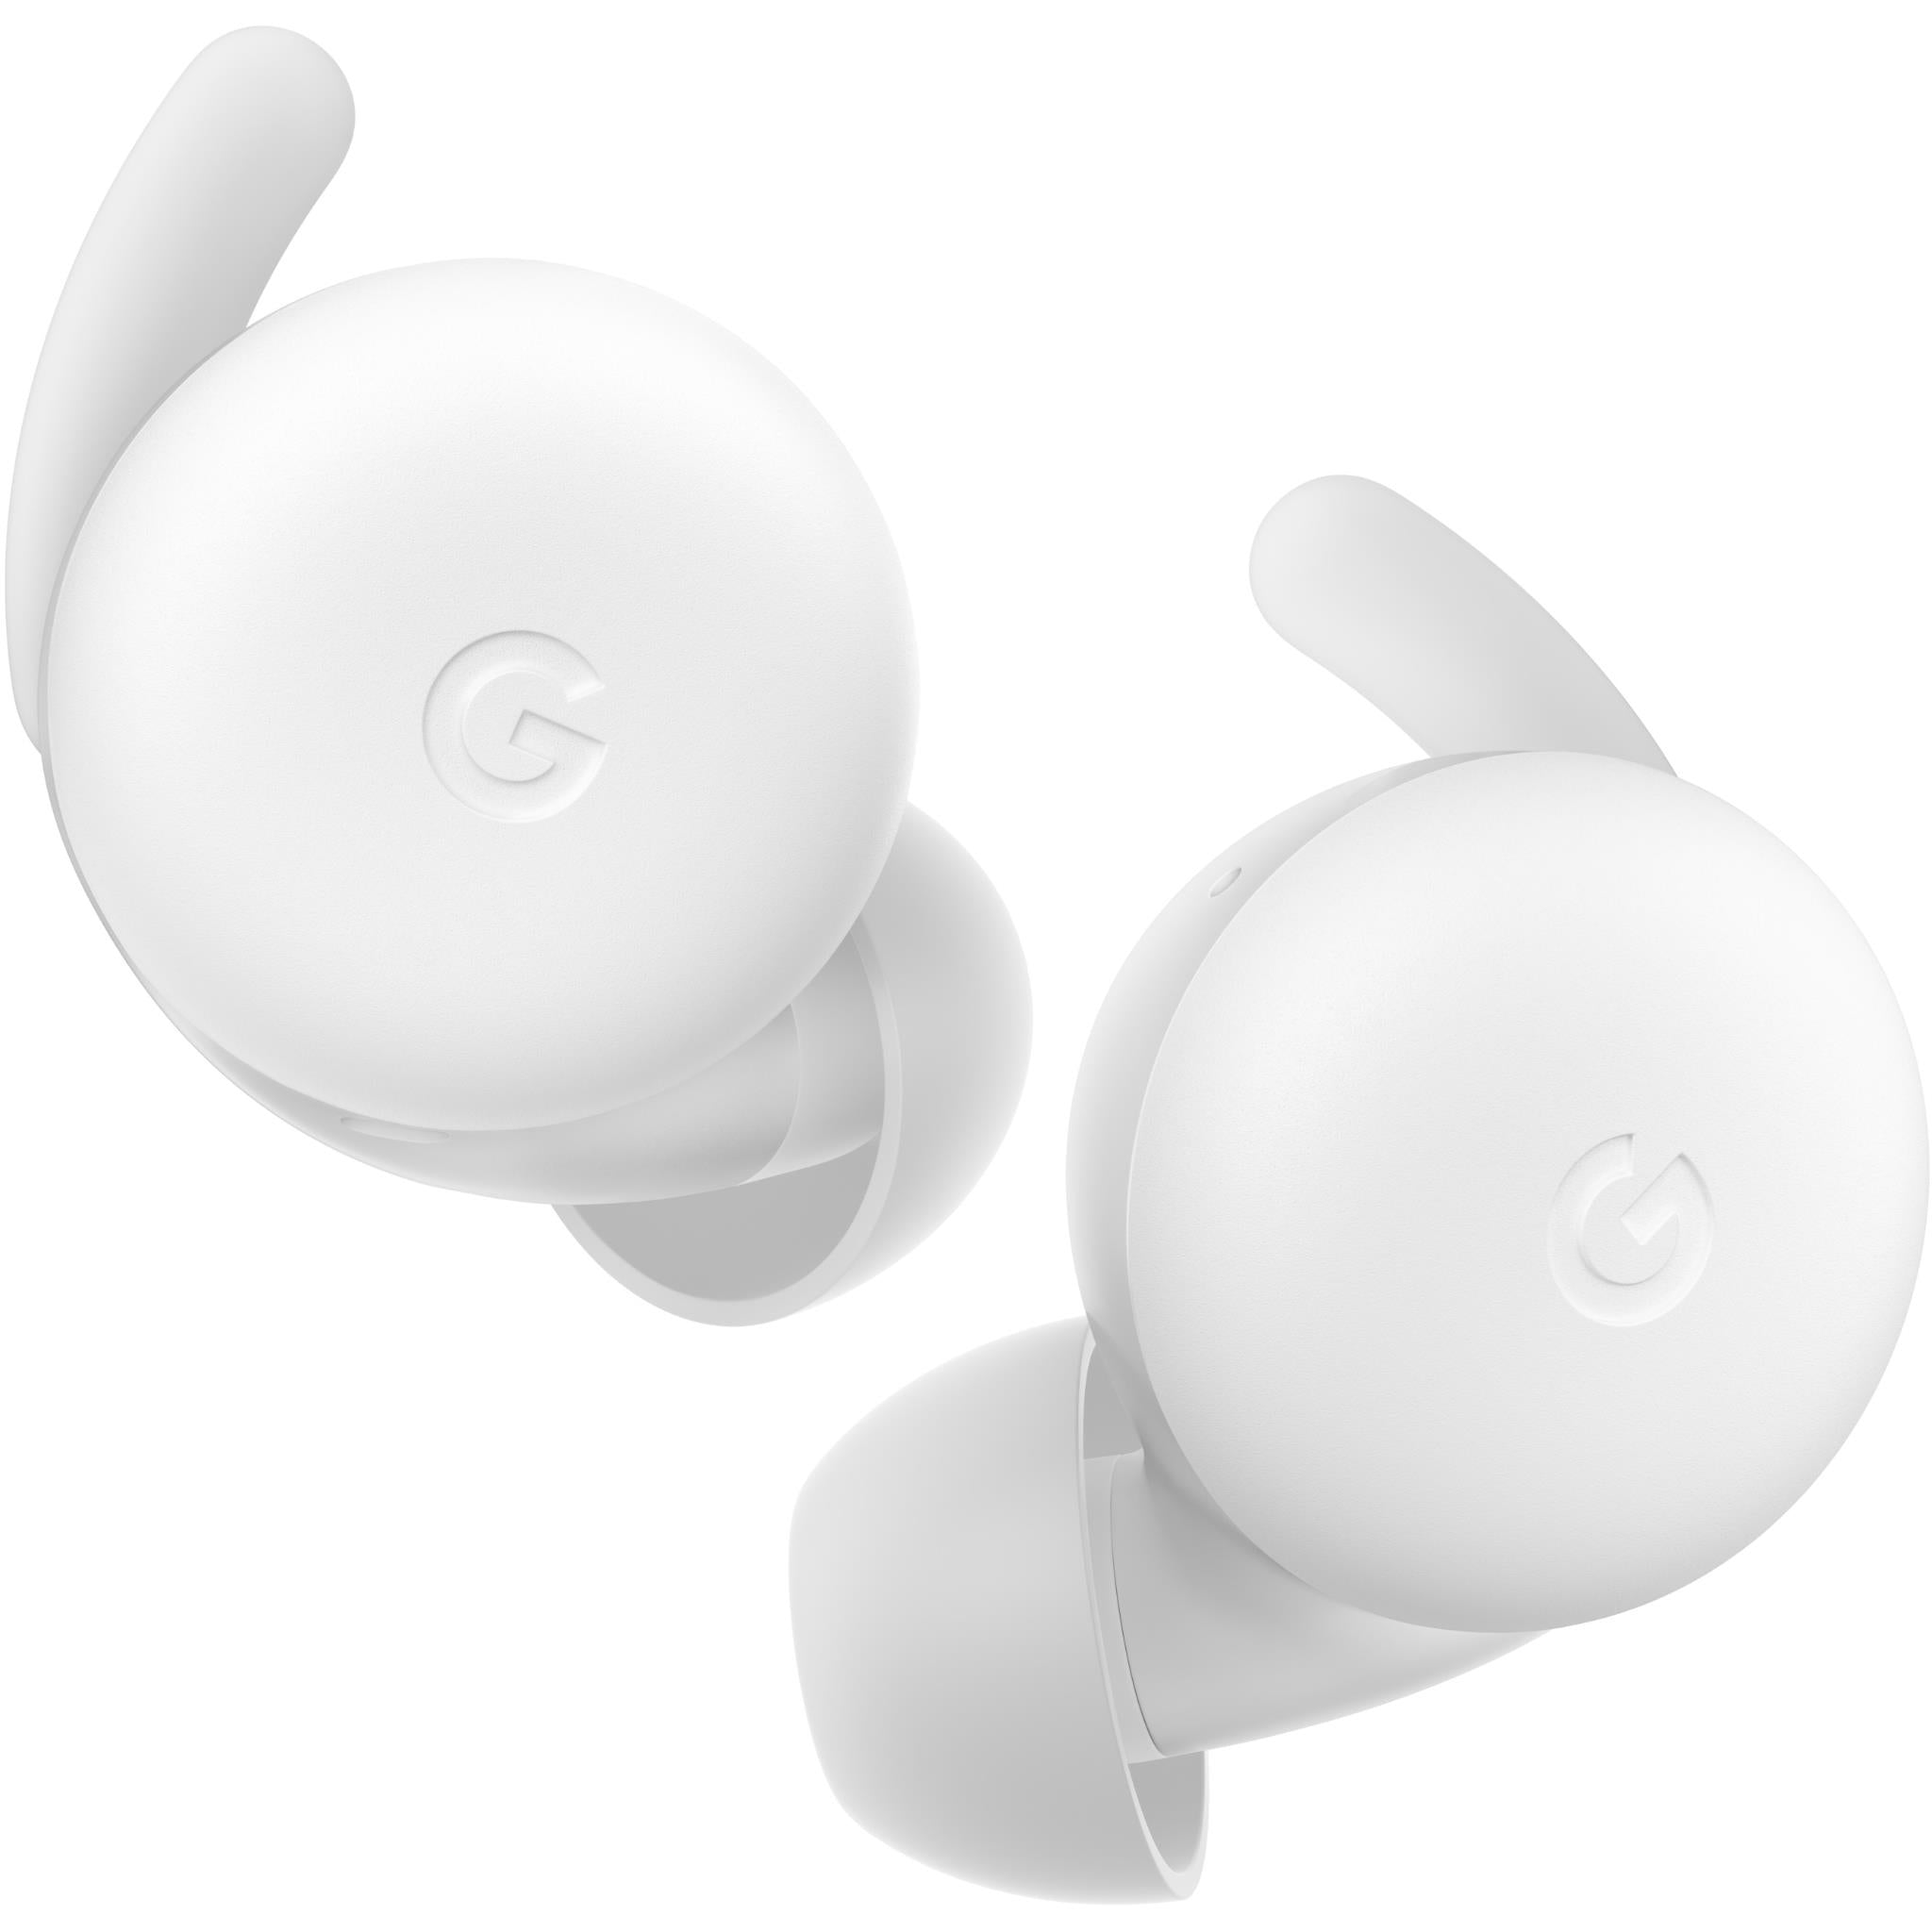 Google Pixel Buds A-Series - Truly Wireless Earbuds - Audio